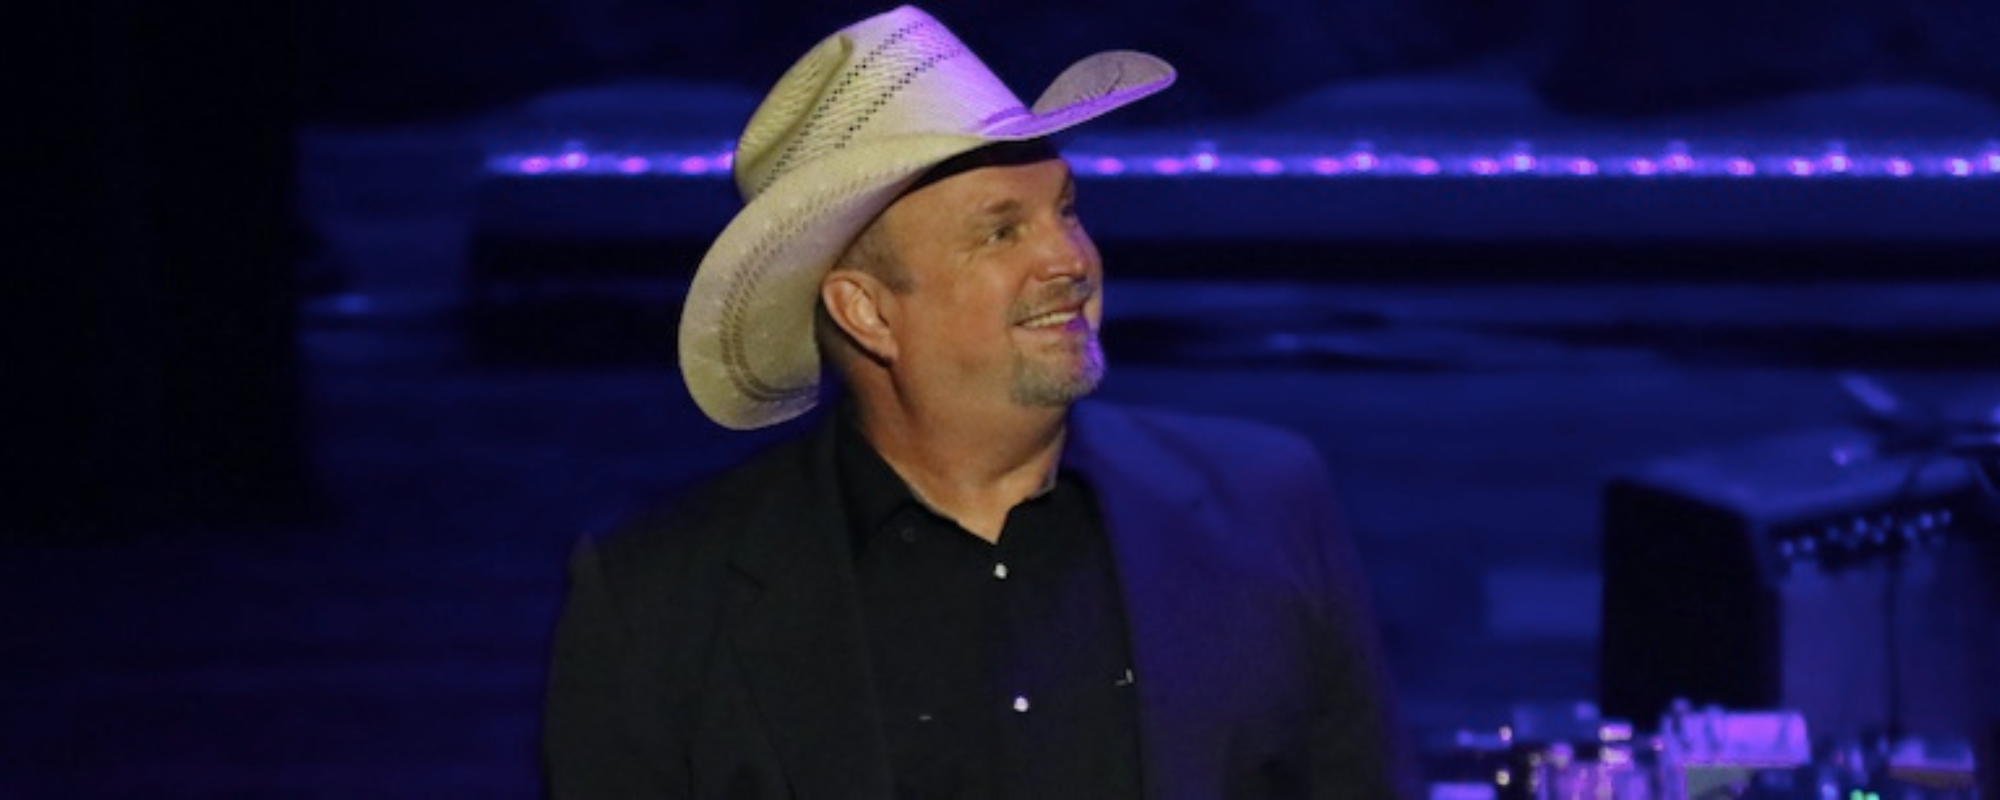 Garth Brooks  GARTH BROOKS ANNOUNCES THE RELEASE OF HIS 14TH STUDIO ALBUM, TIME  TRAVELER, ON HIS UPCOMING 7-DISC BOXED SET, THE LIMITED SERIES